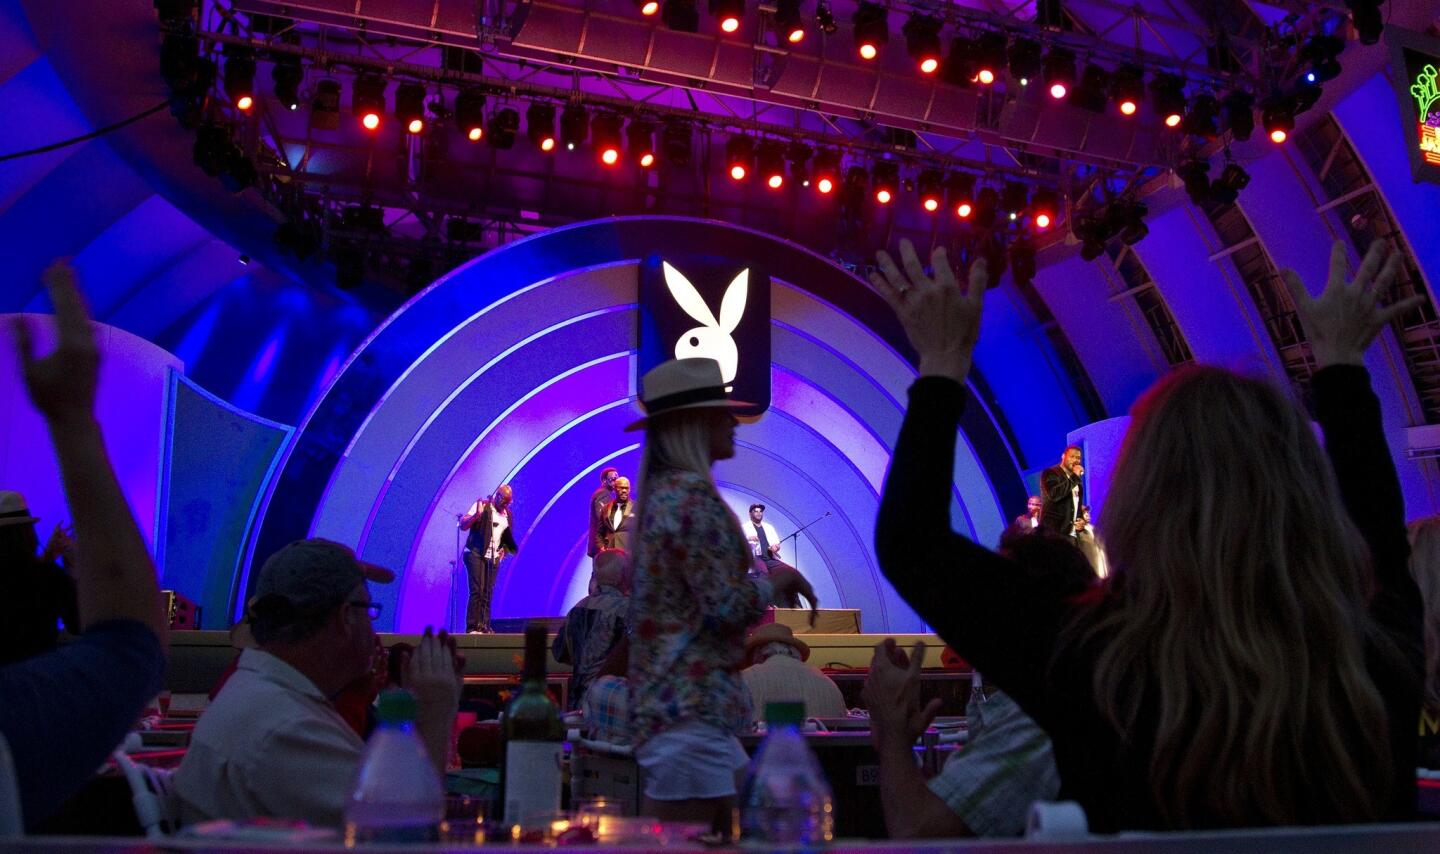 A sold-out crowd enjoys the opening day of the Playboy Jazz Festival at the Hollywood Bowl on Saturday.